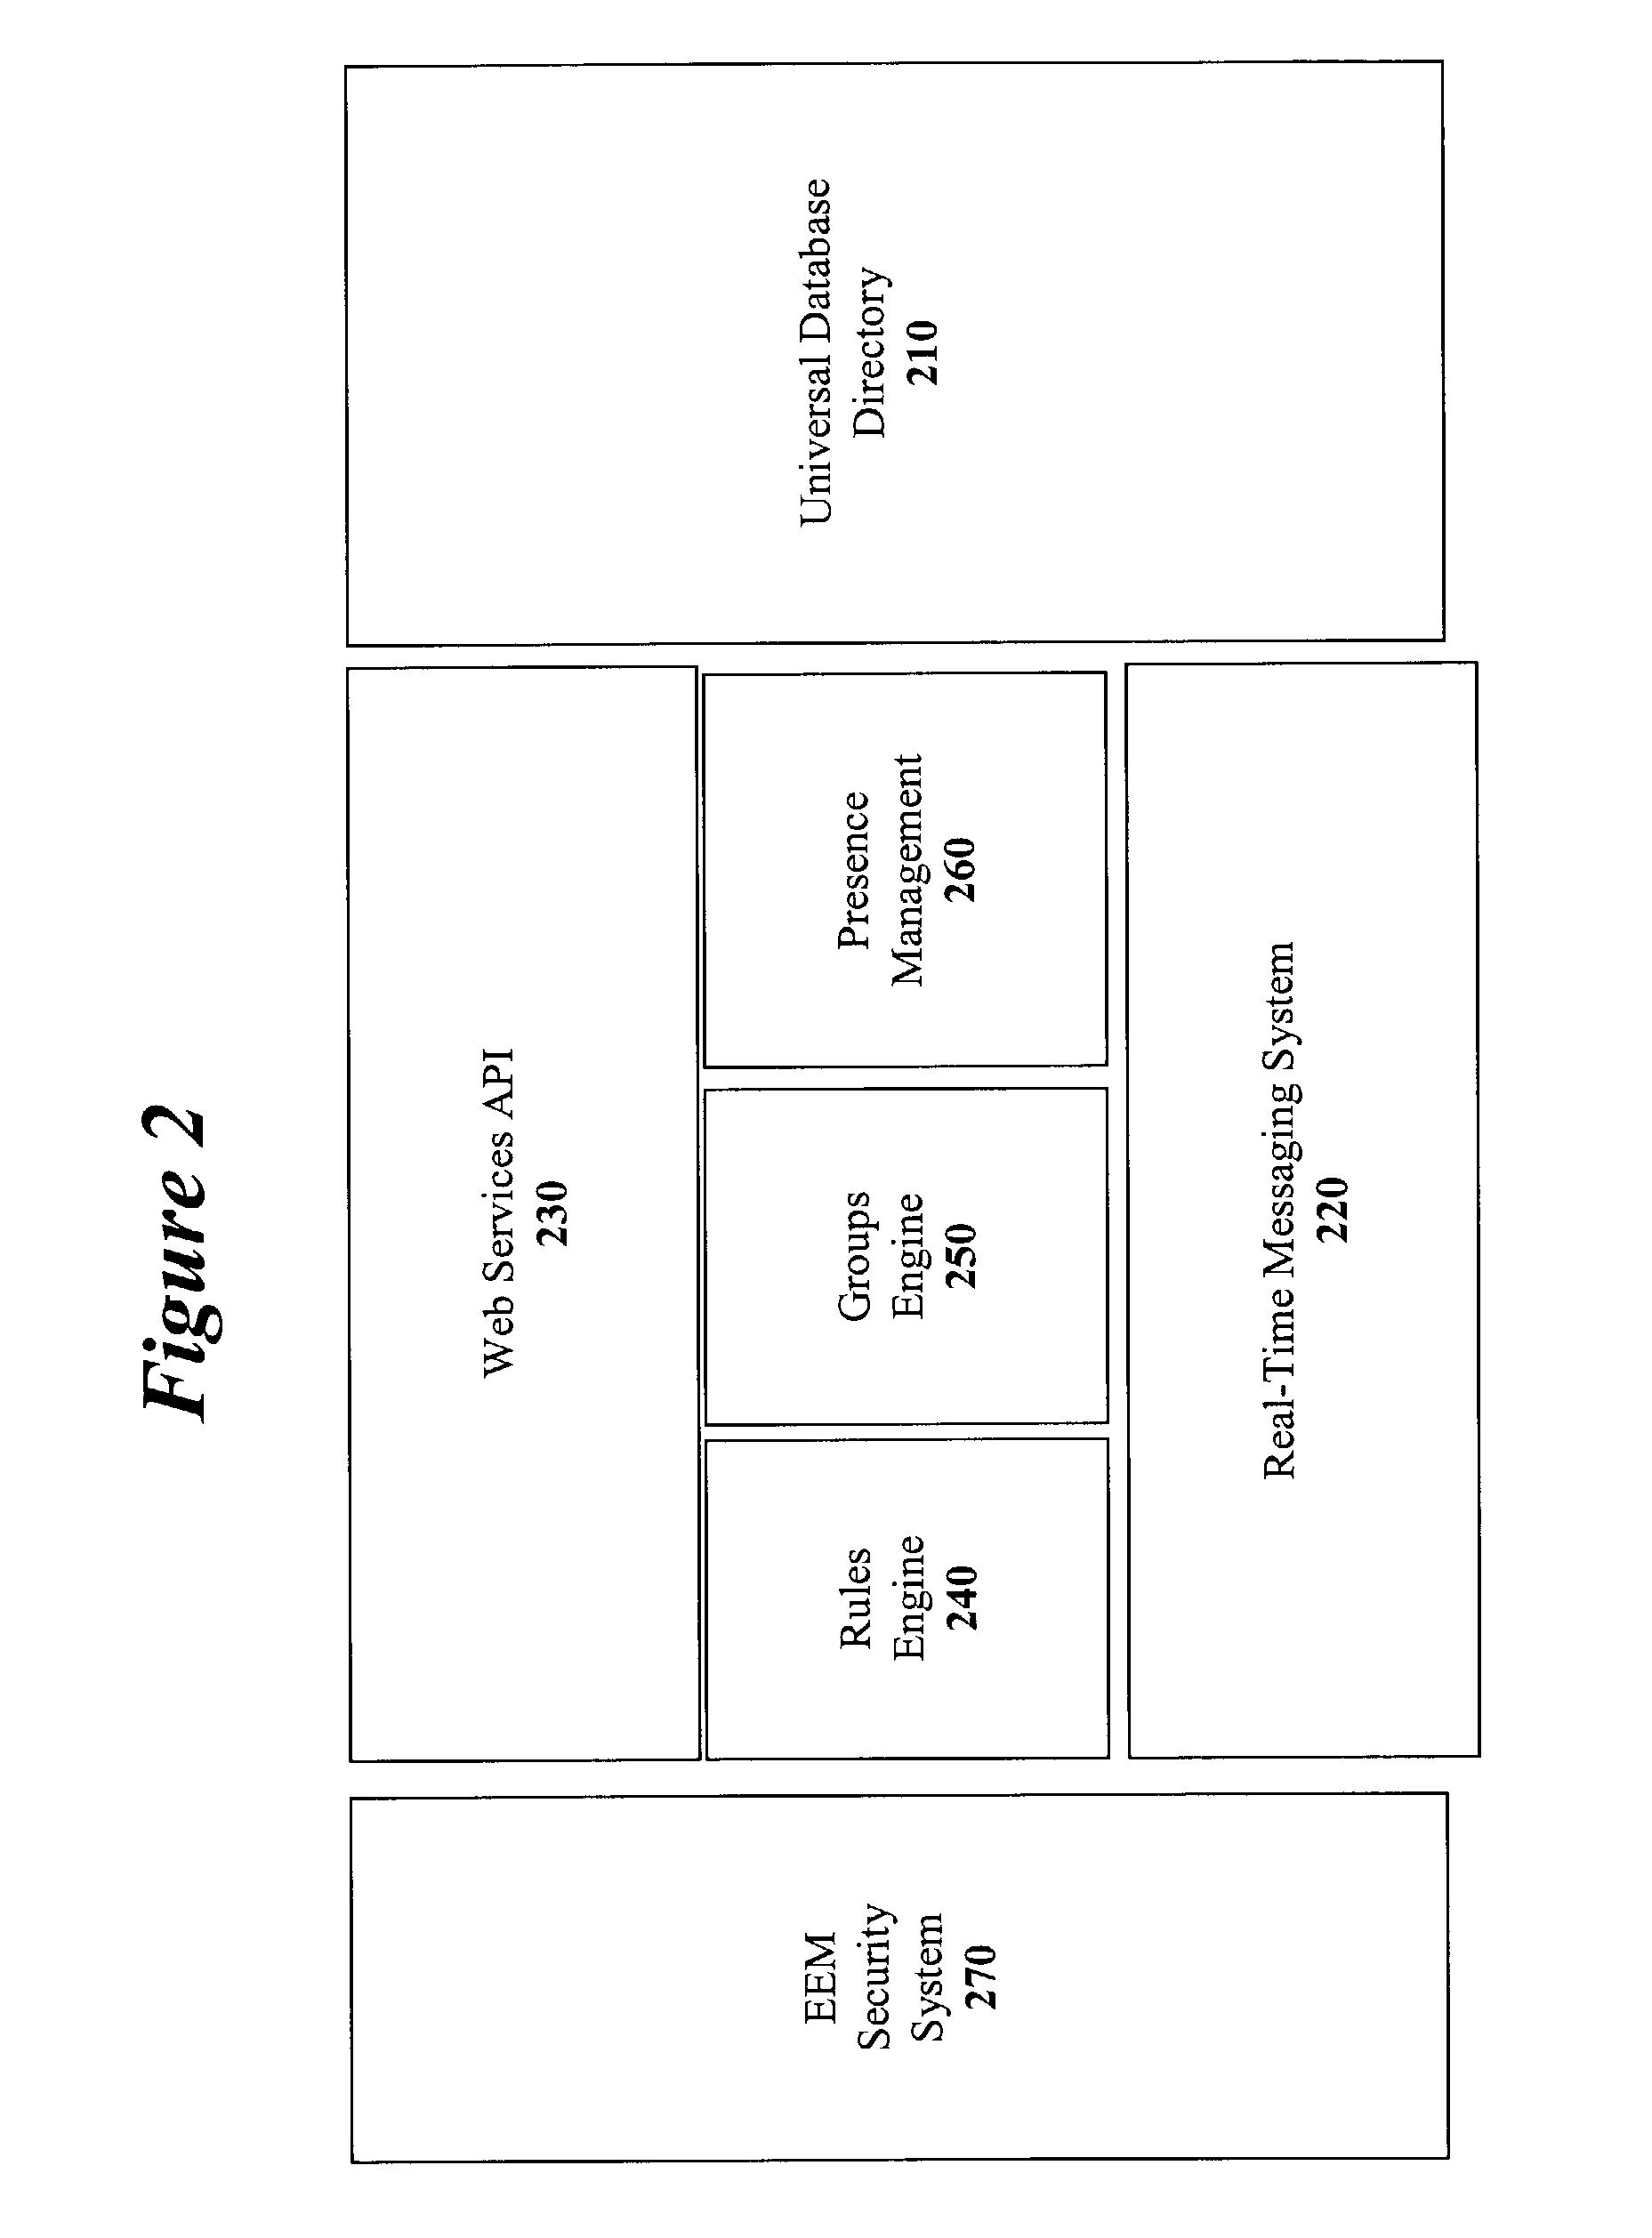 Method and apparatus for implementing a real-time event management platform